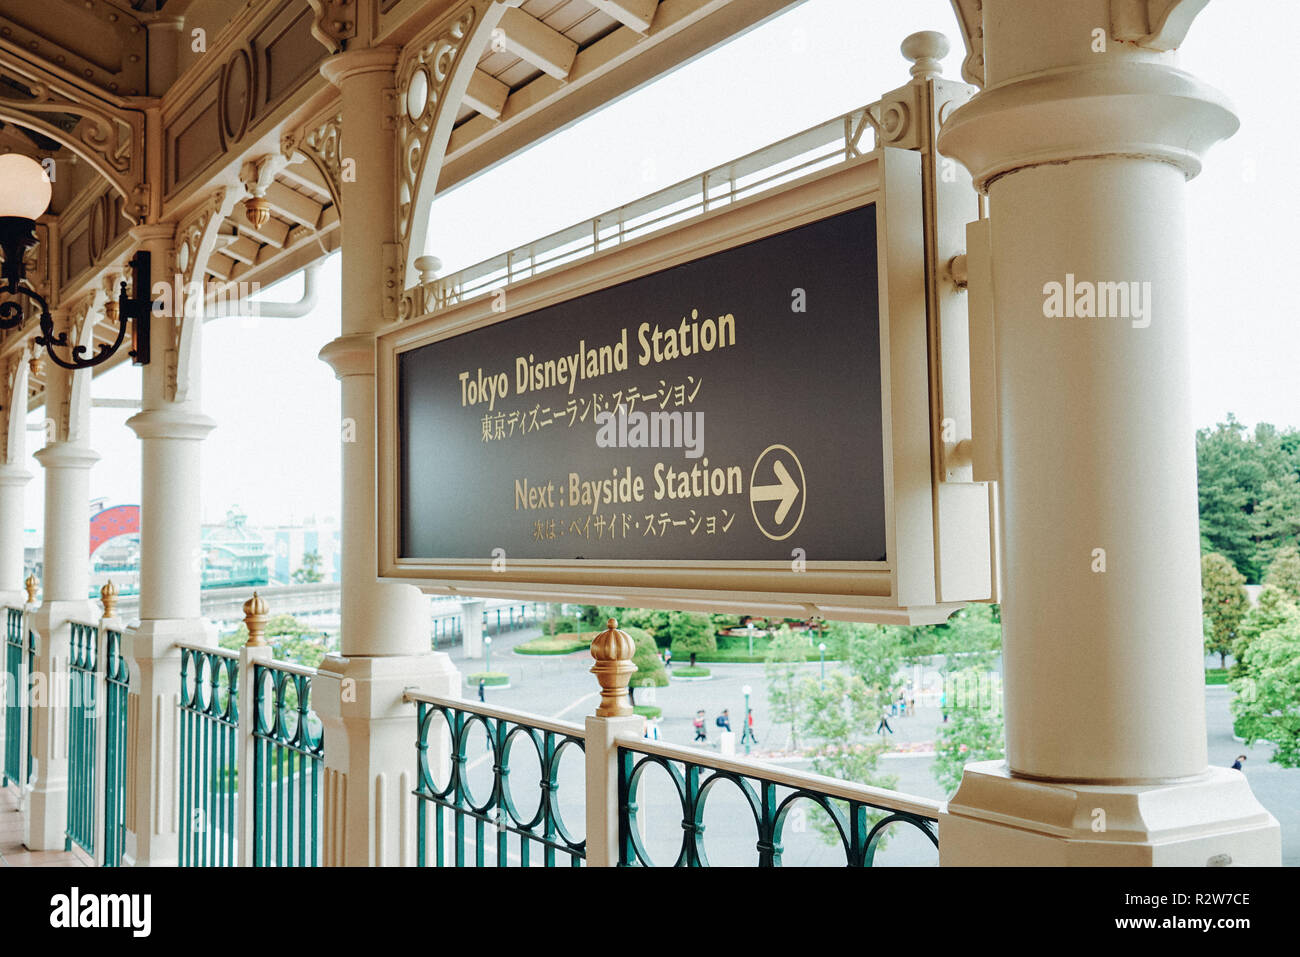 Tokyo Disneyland station sign at the Disney Resort Line monorail system in Chiba, Japan Stock Photo